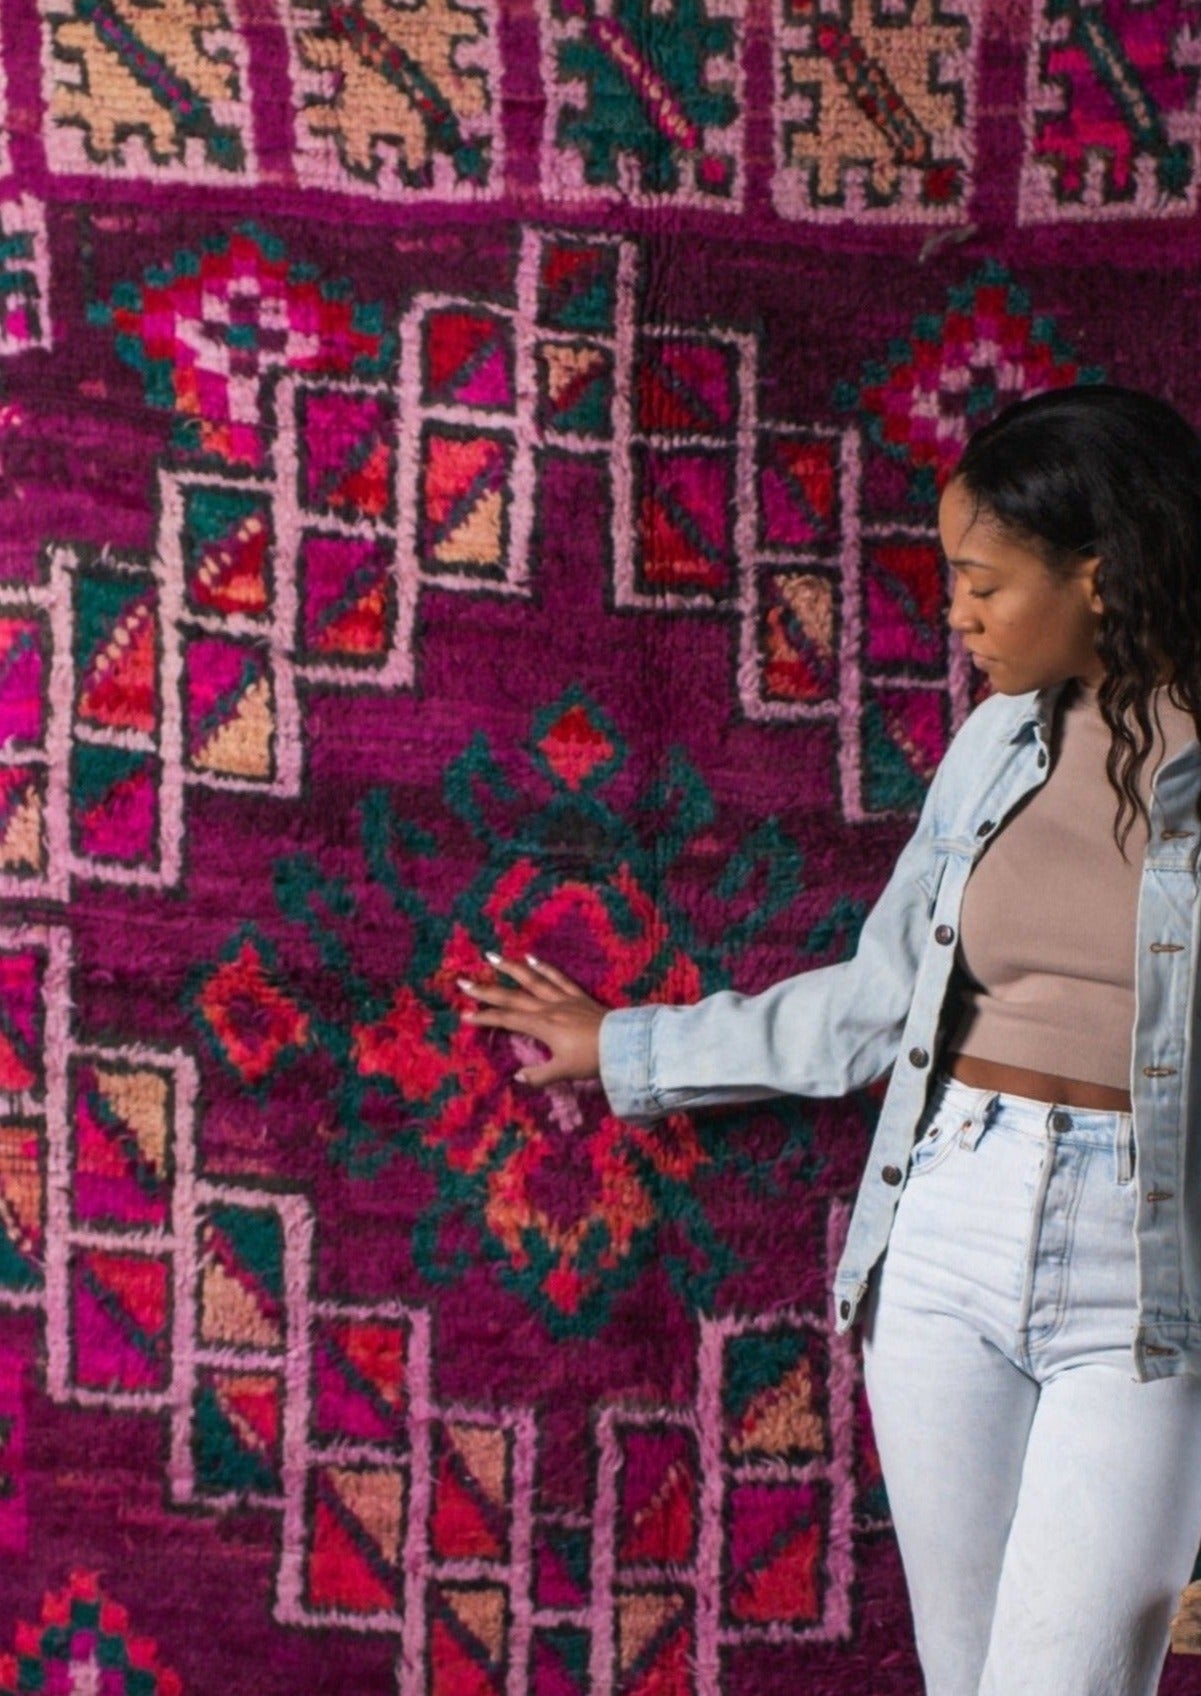 hand touching beautifully designed moroccan rug with berber symbols of protection. beautiful black women wearing Canadian tuxedo, long nails and neutral top fall fashion